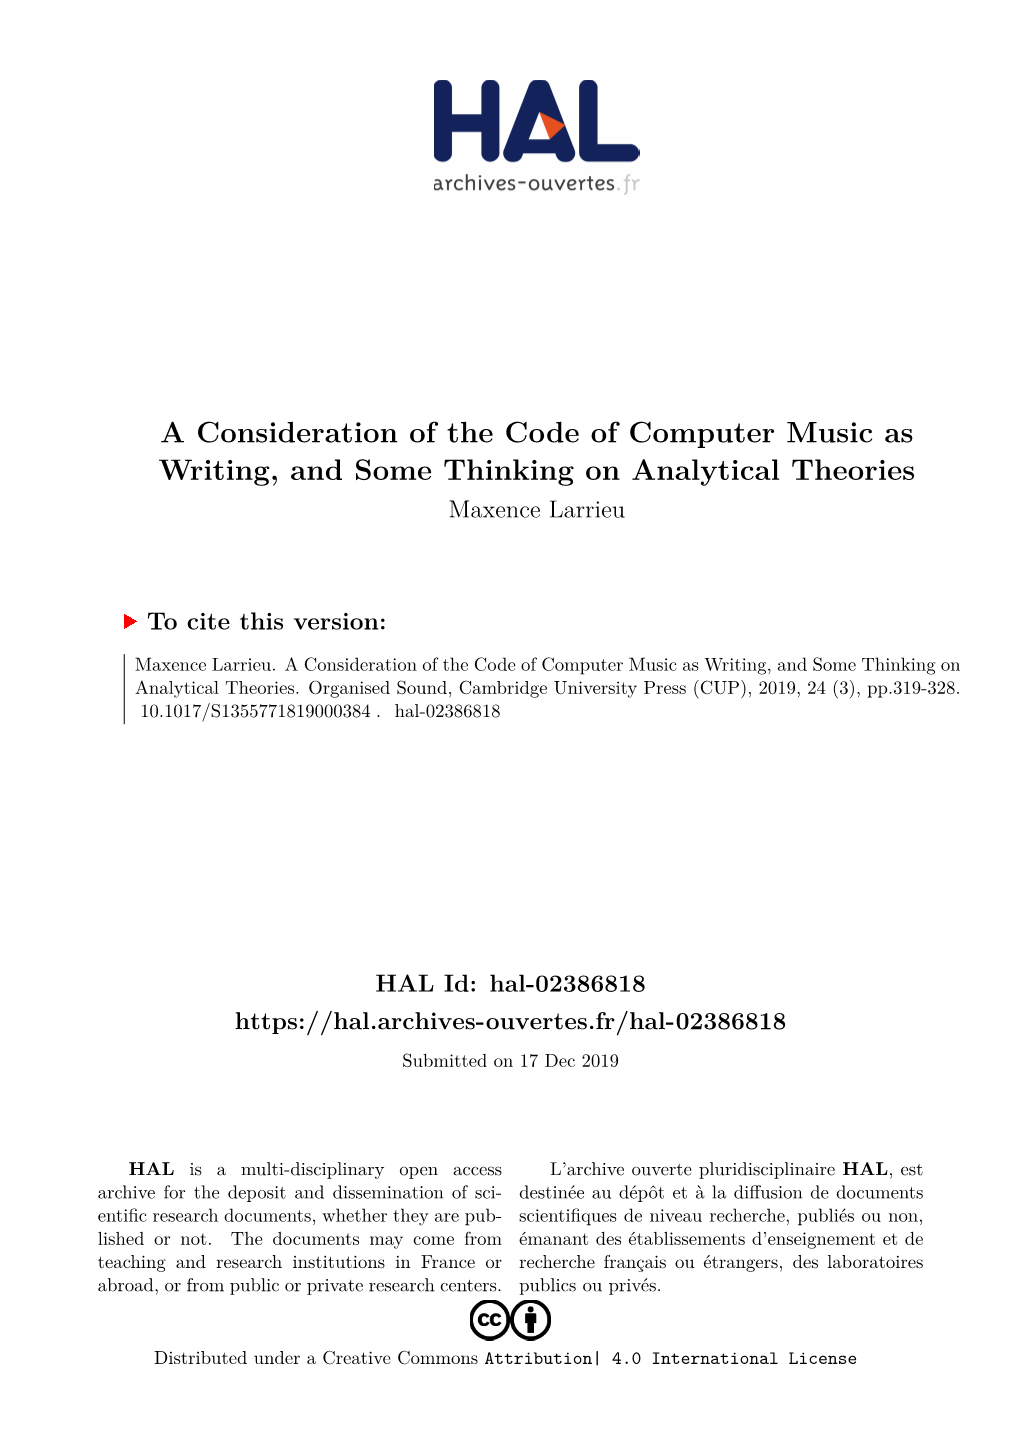 A Consideration of the Code of Computer Music As Writing, and Some Thinking on Analytical Theories Maxence Larrieu